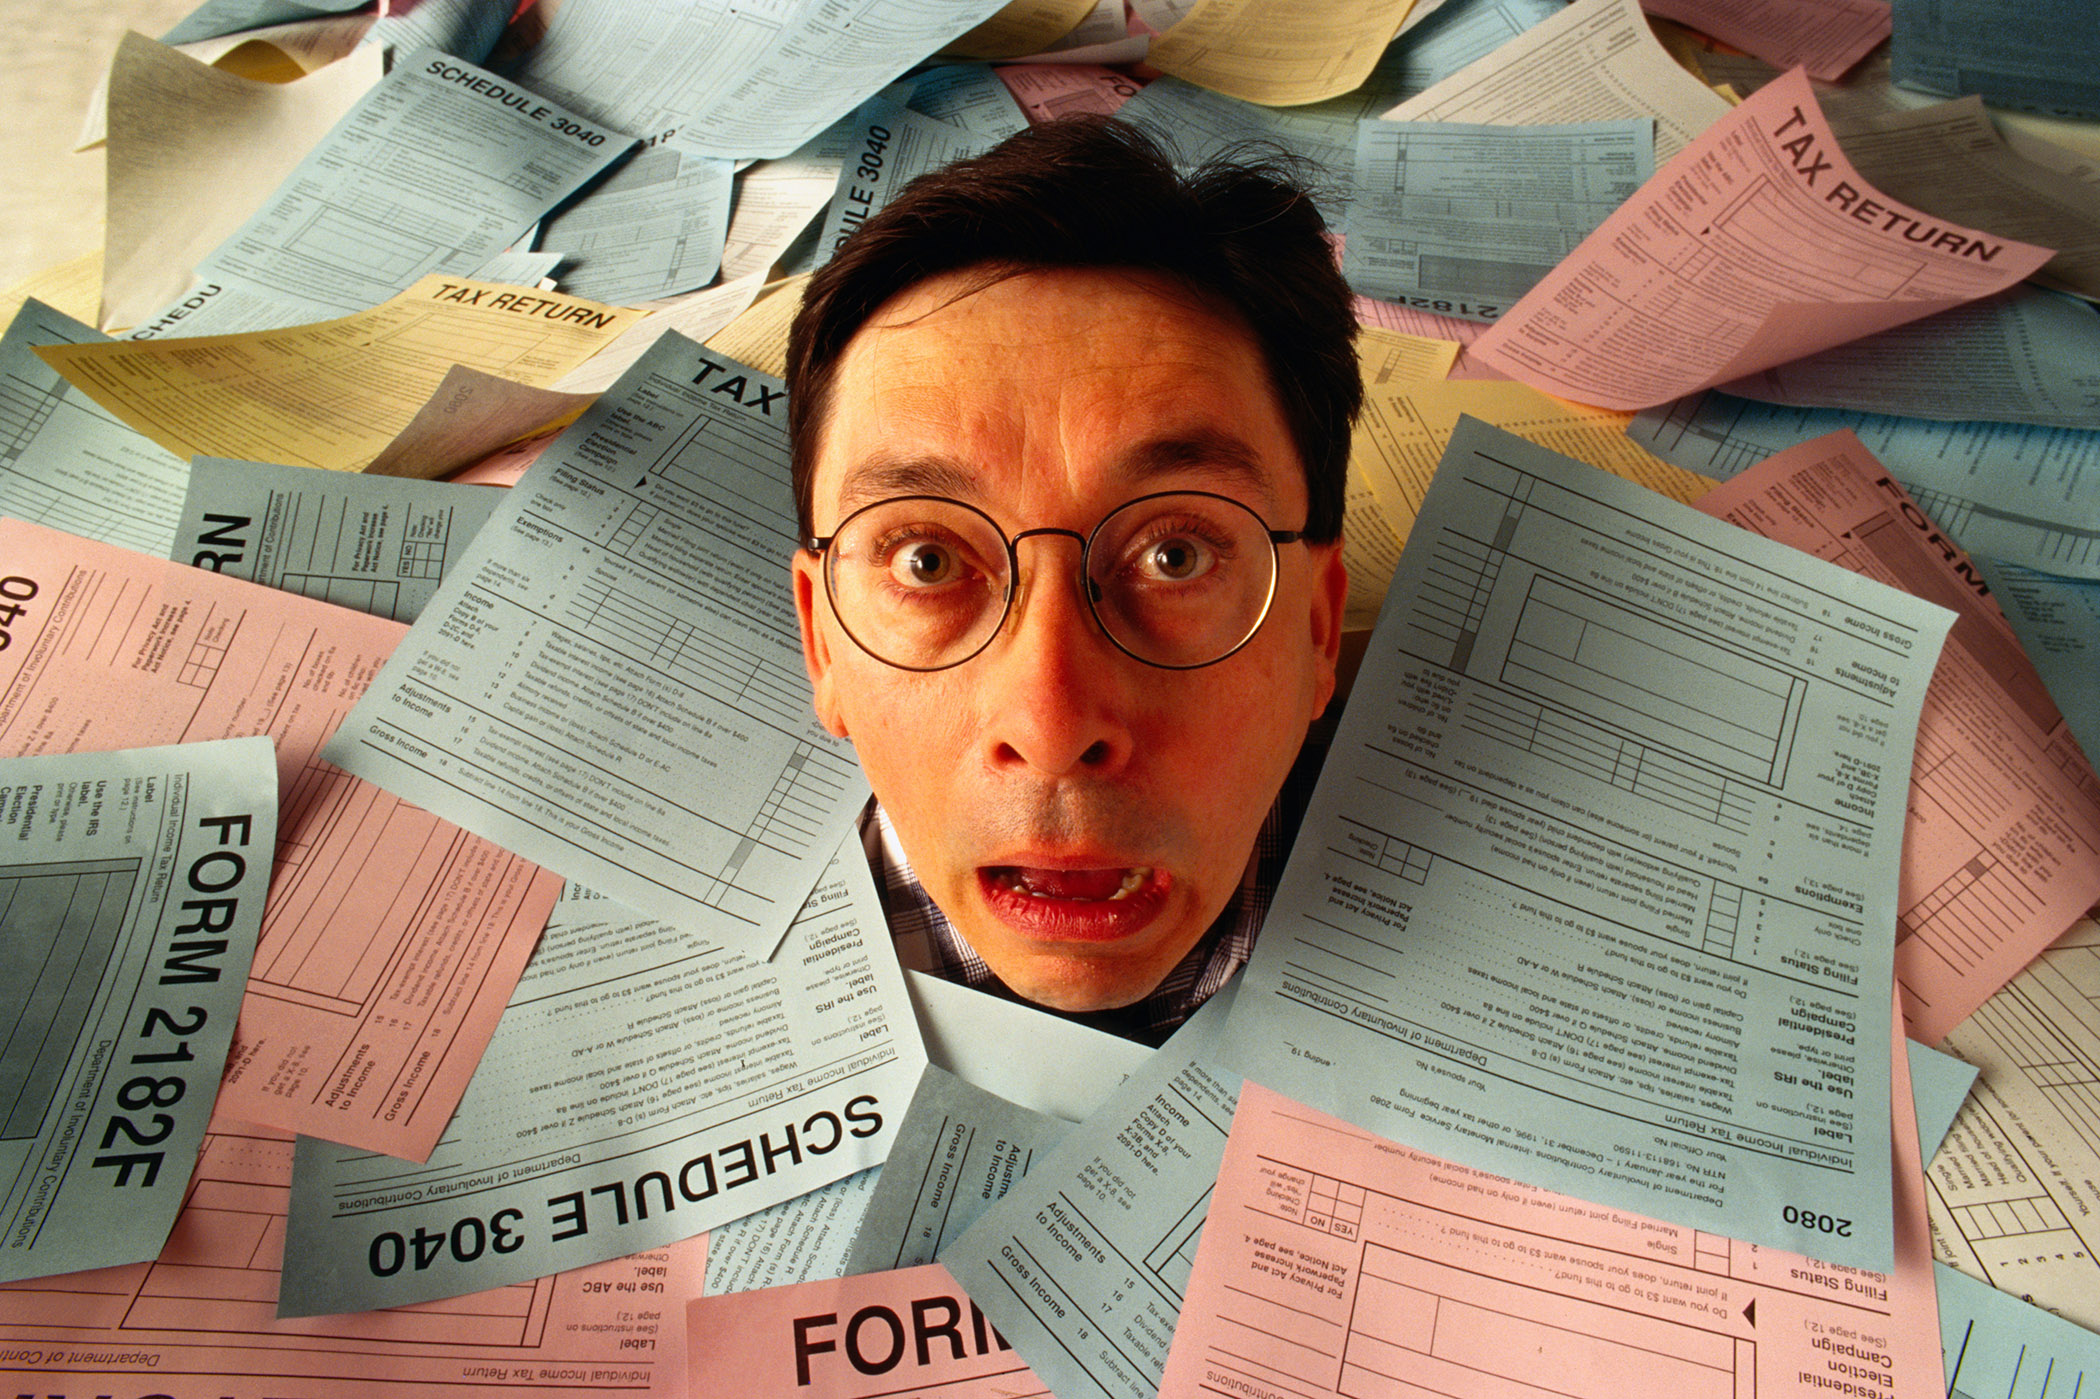 MAN IN SEA OF TAX FORMS